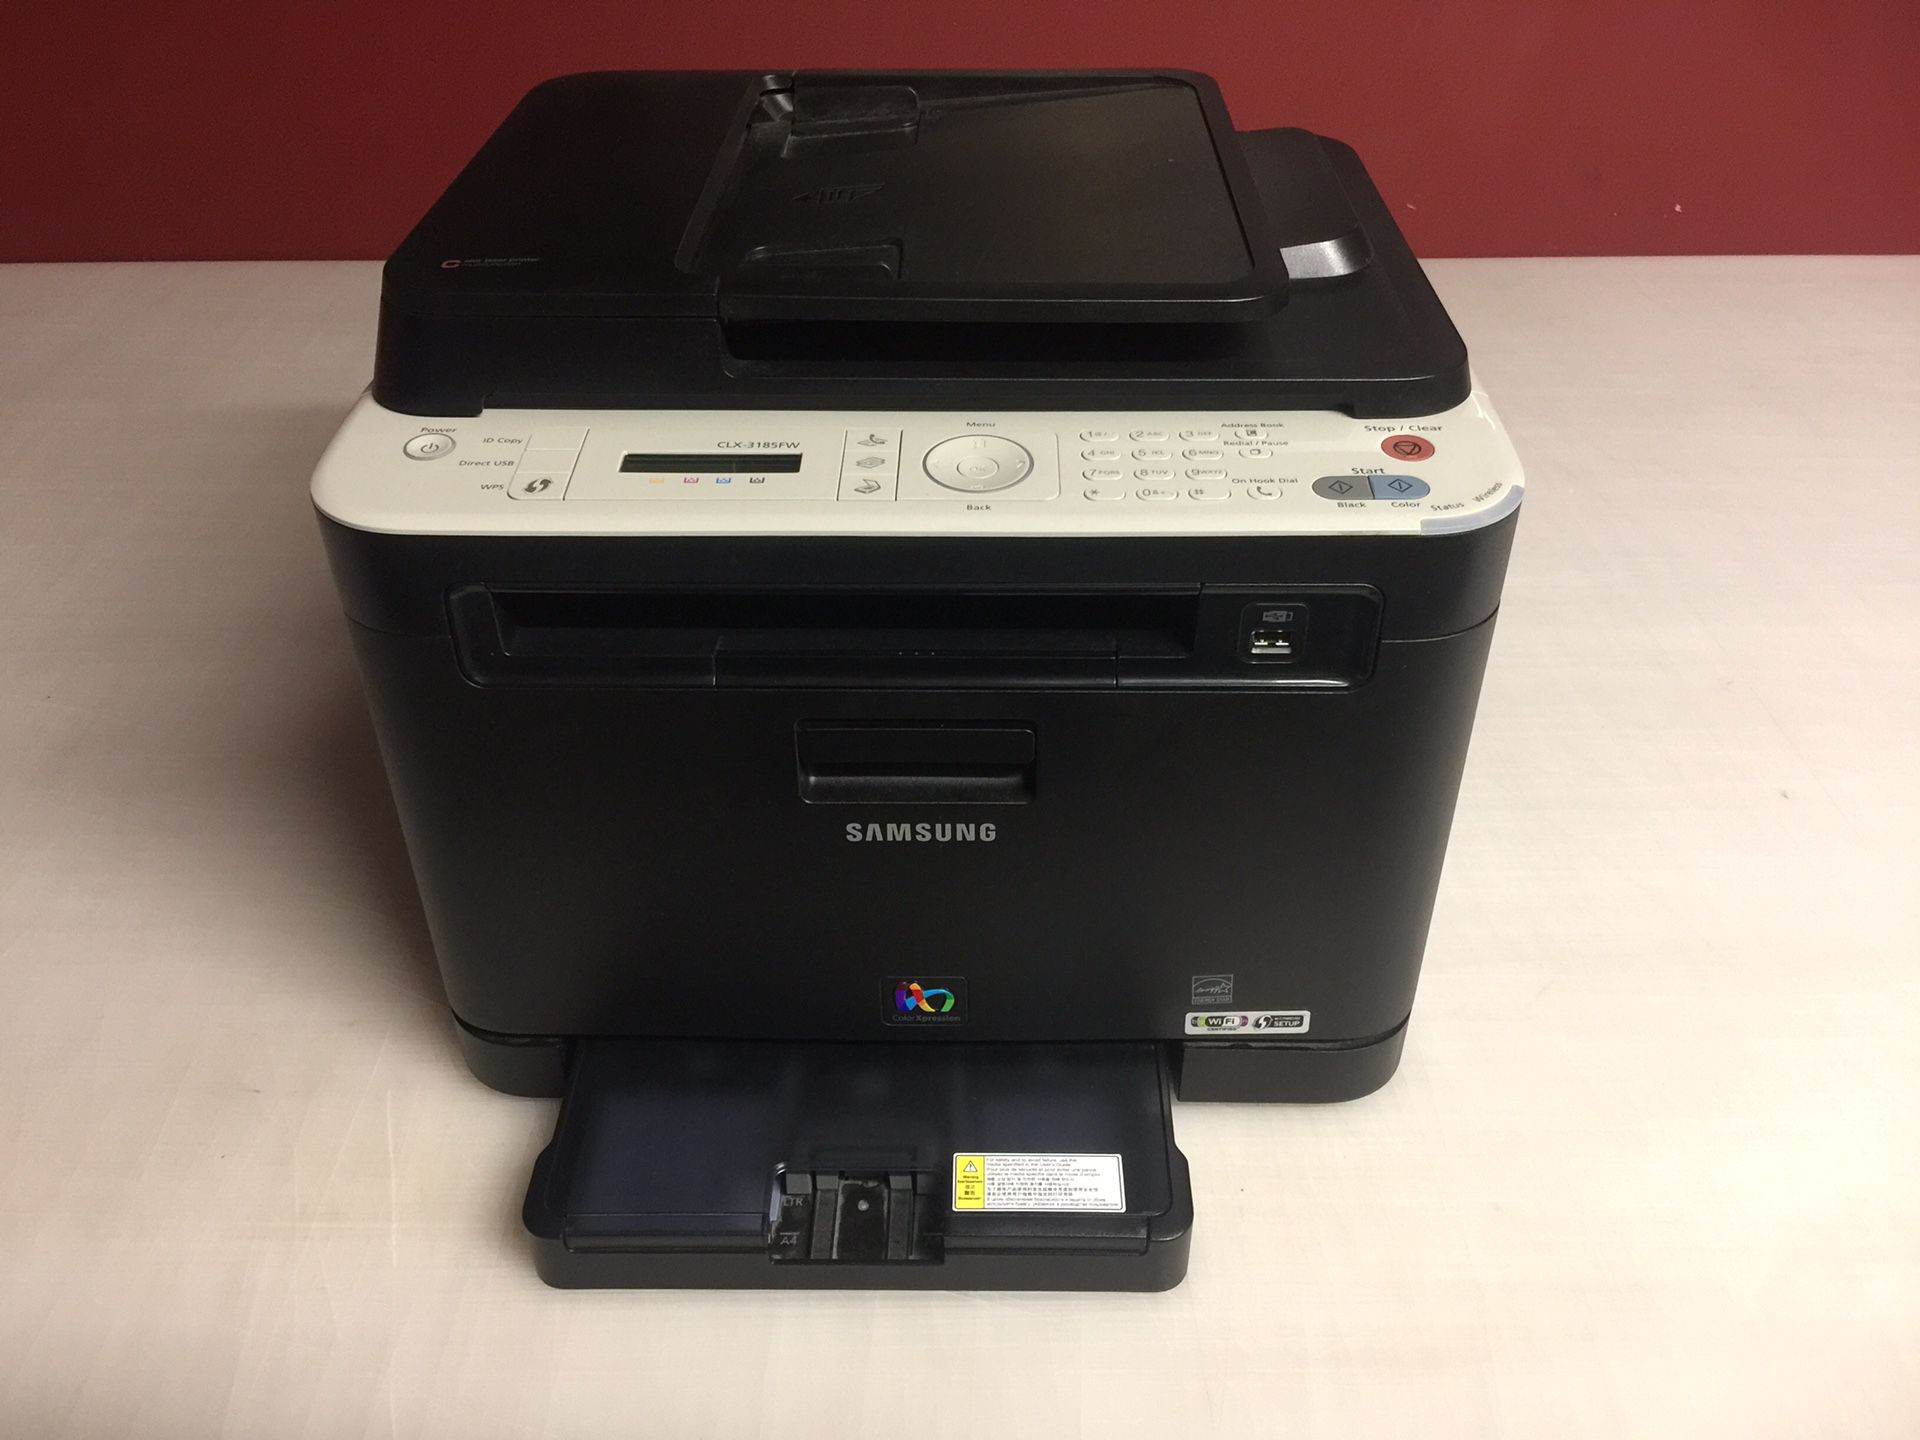 Samsung Color Printer, Copier, Scanner anf FAX All-In-One CLX-3185FW